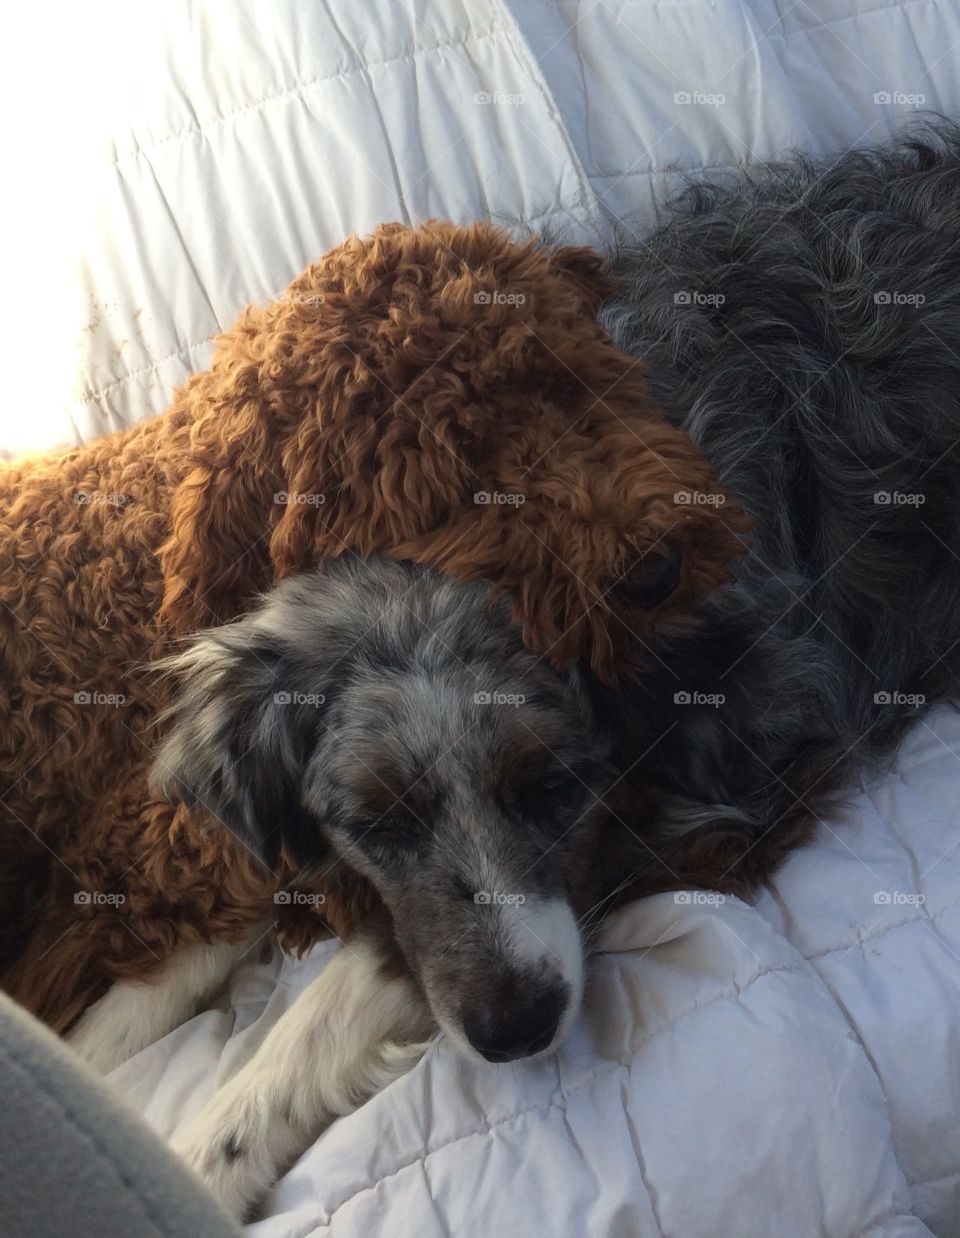 Two dogs that are best friends falling asleep together. Australian Shephard and golden doodle 